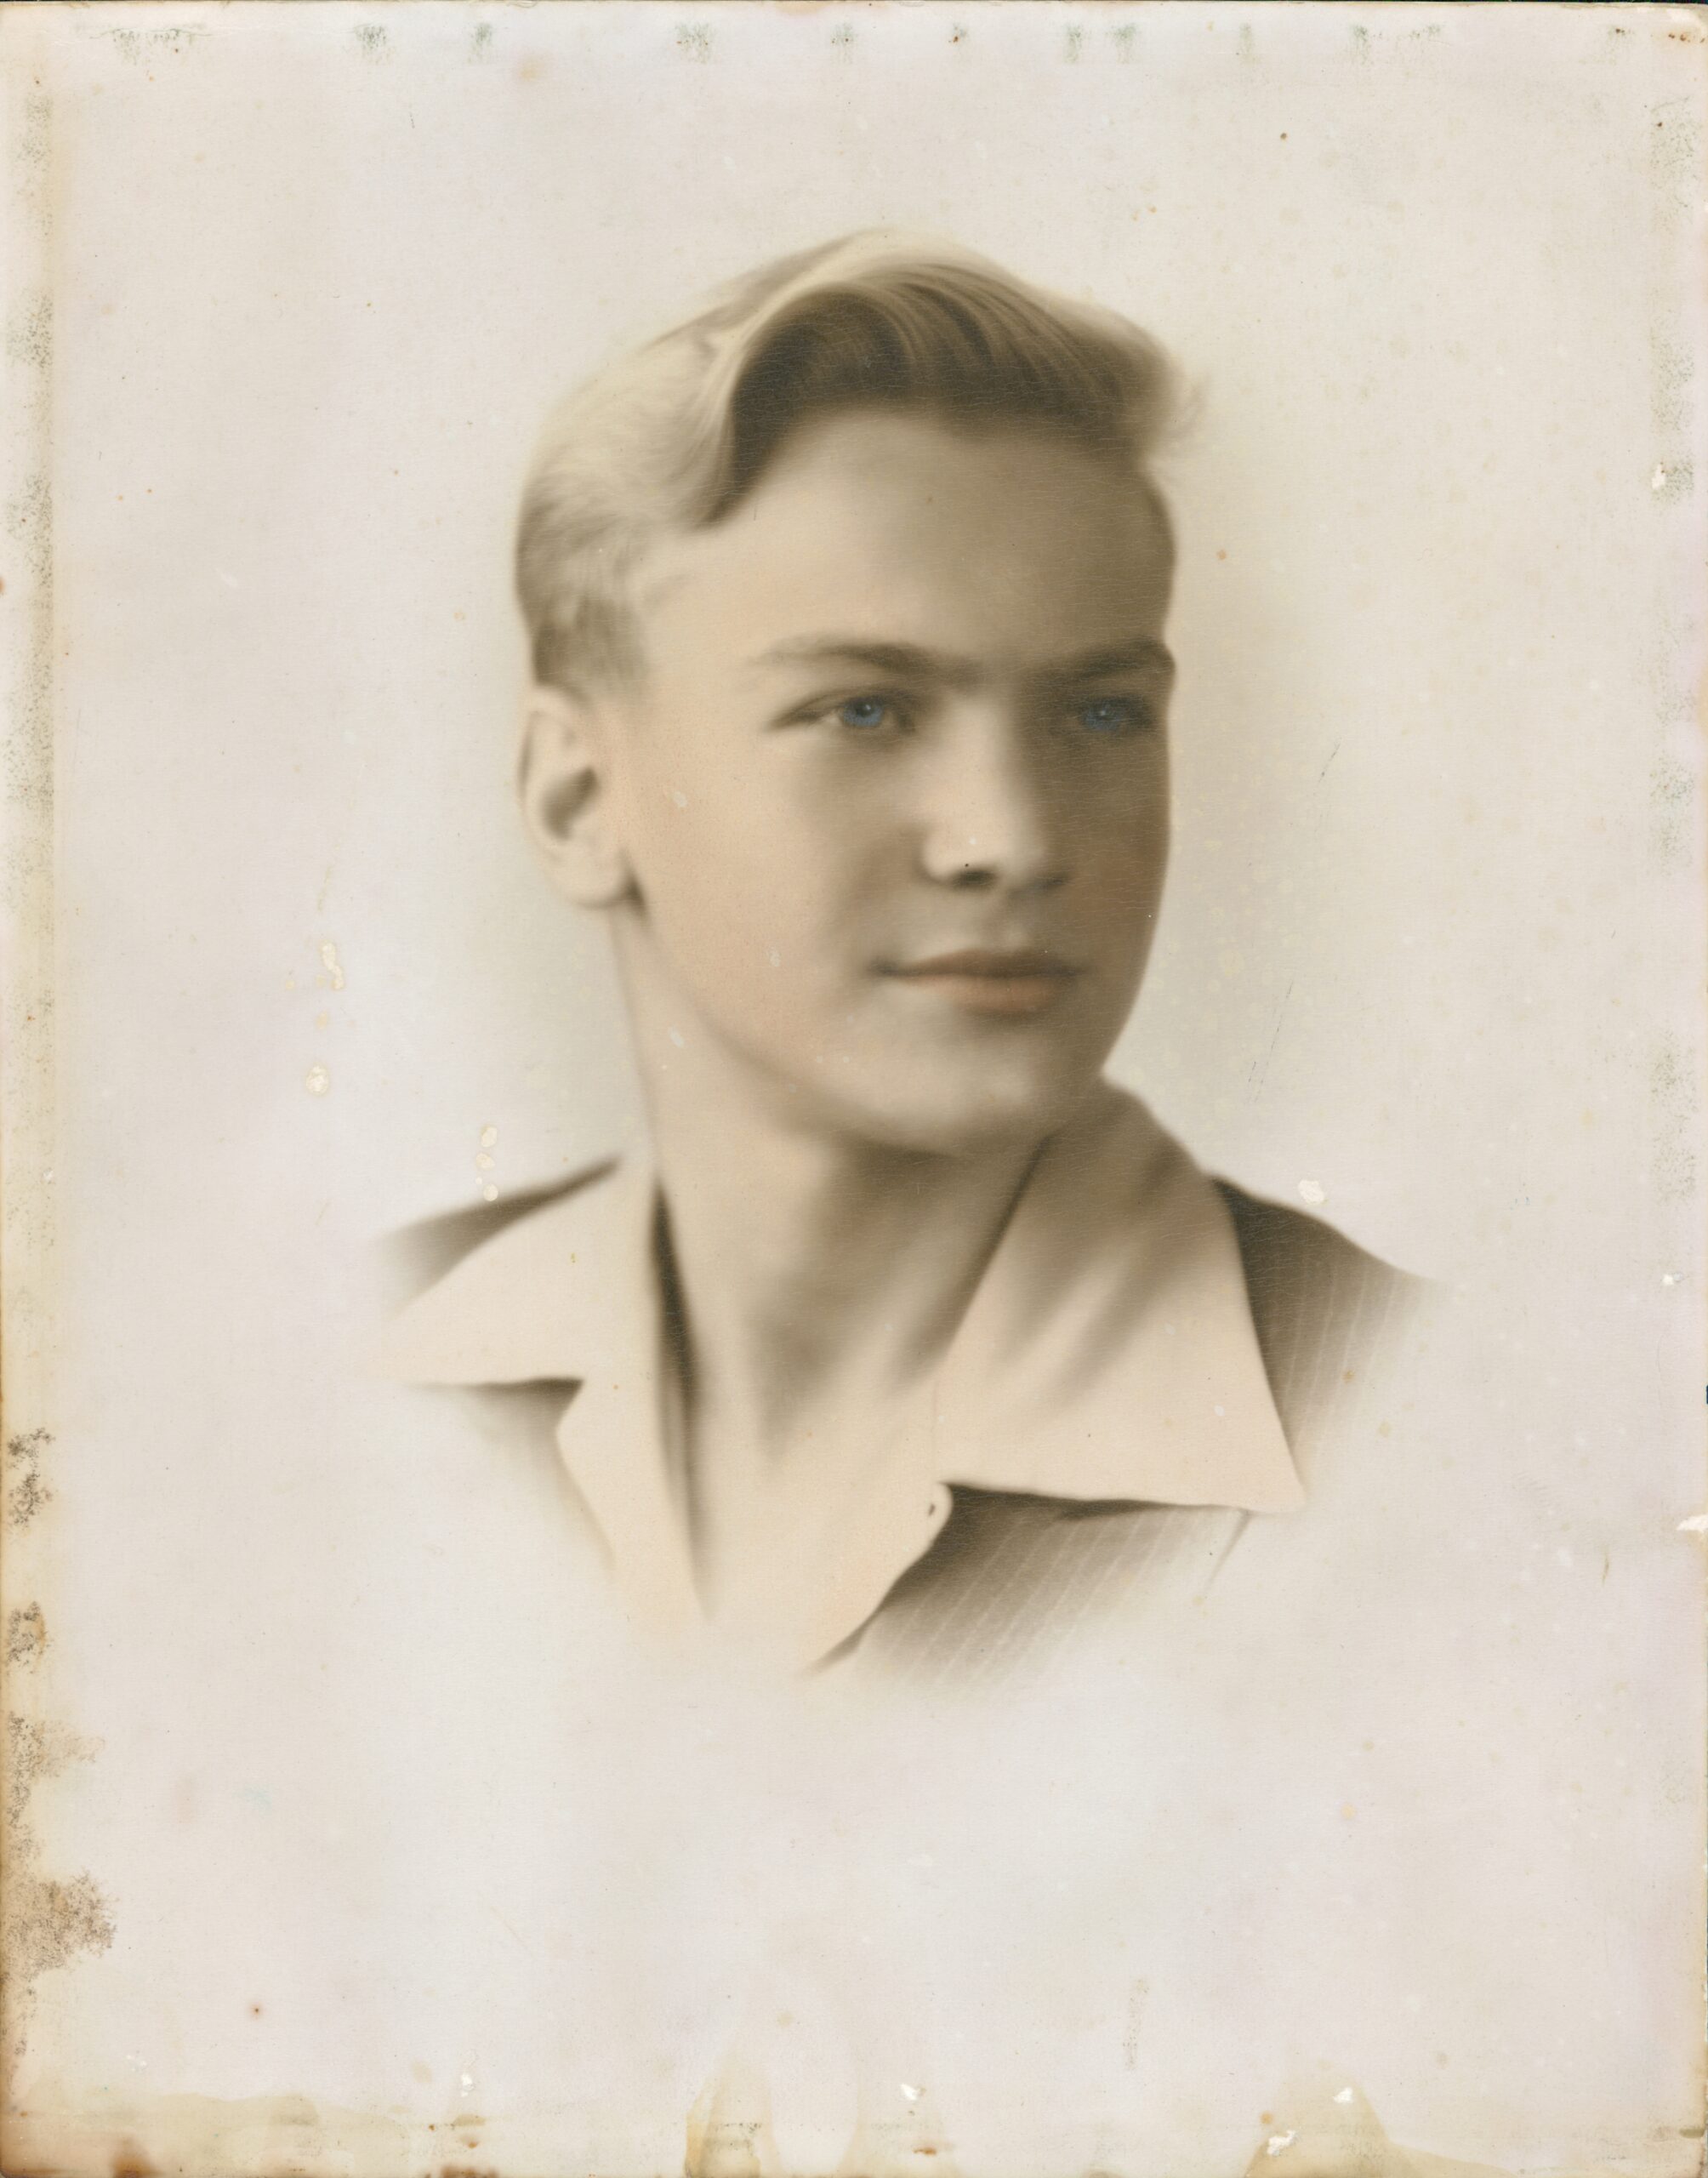 A black and white headshot of a young man with blonde hair and blue eyes.